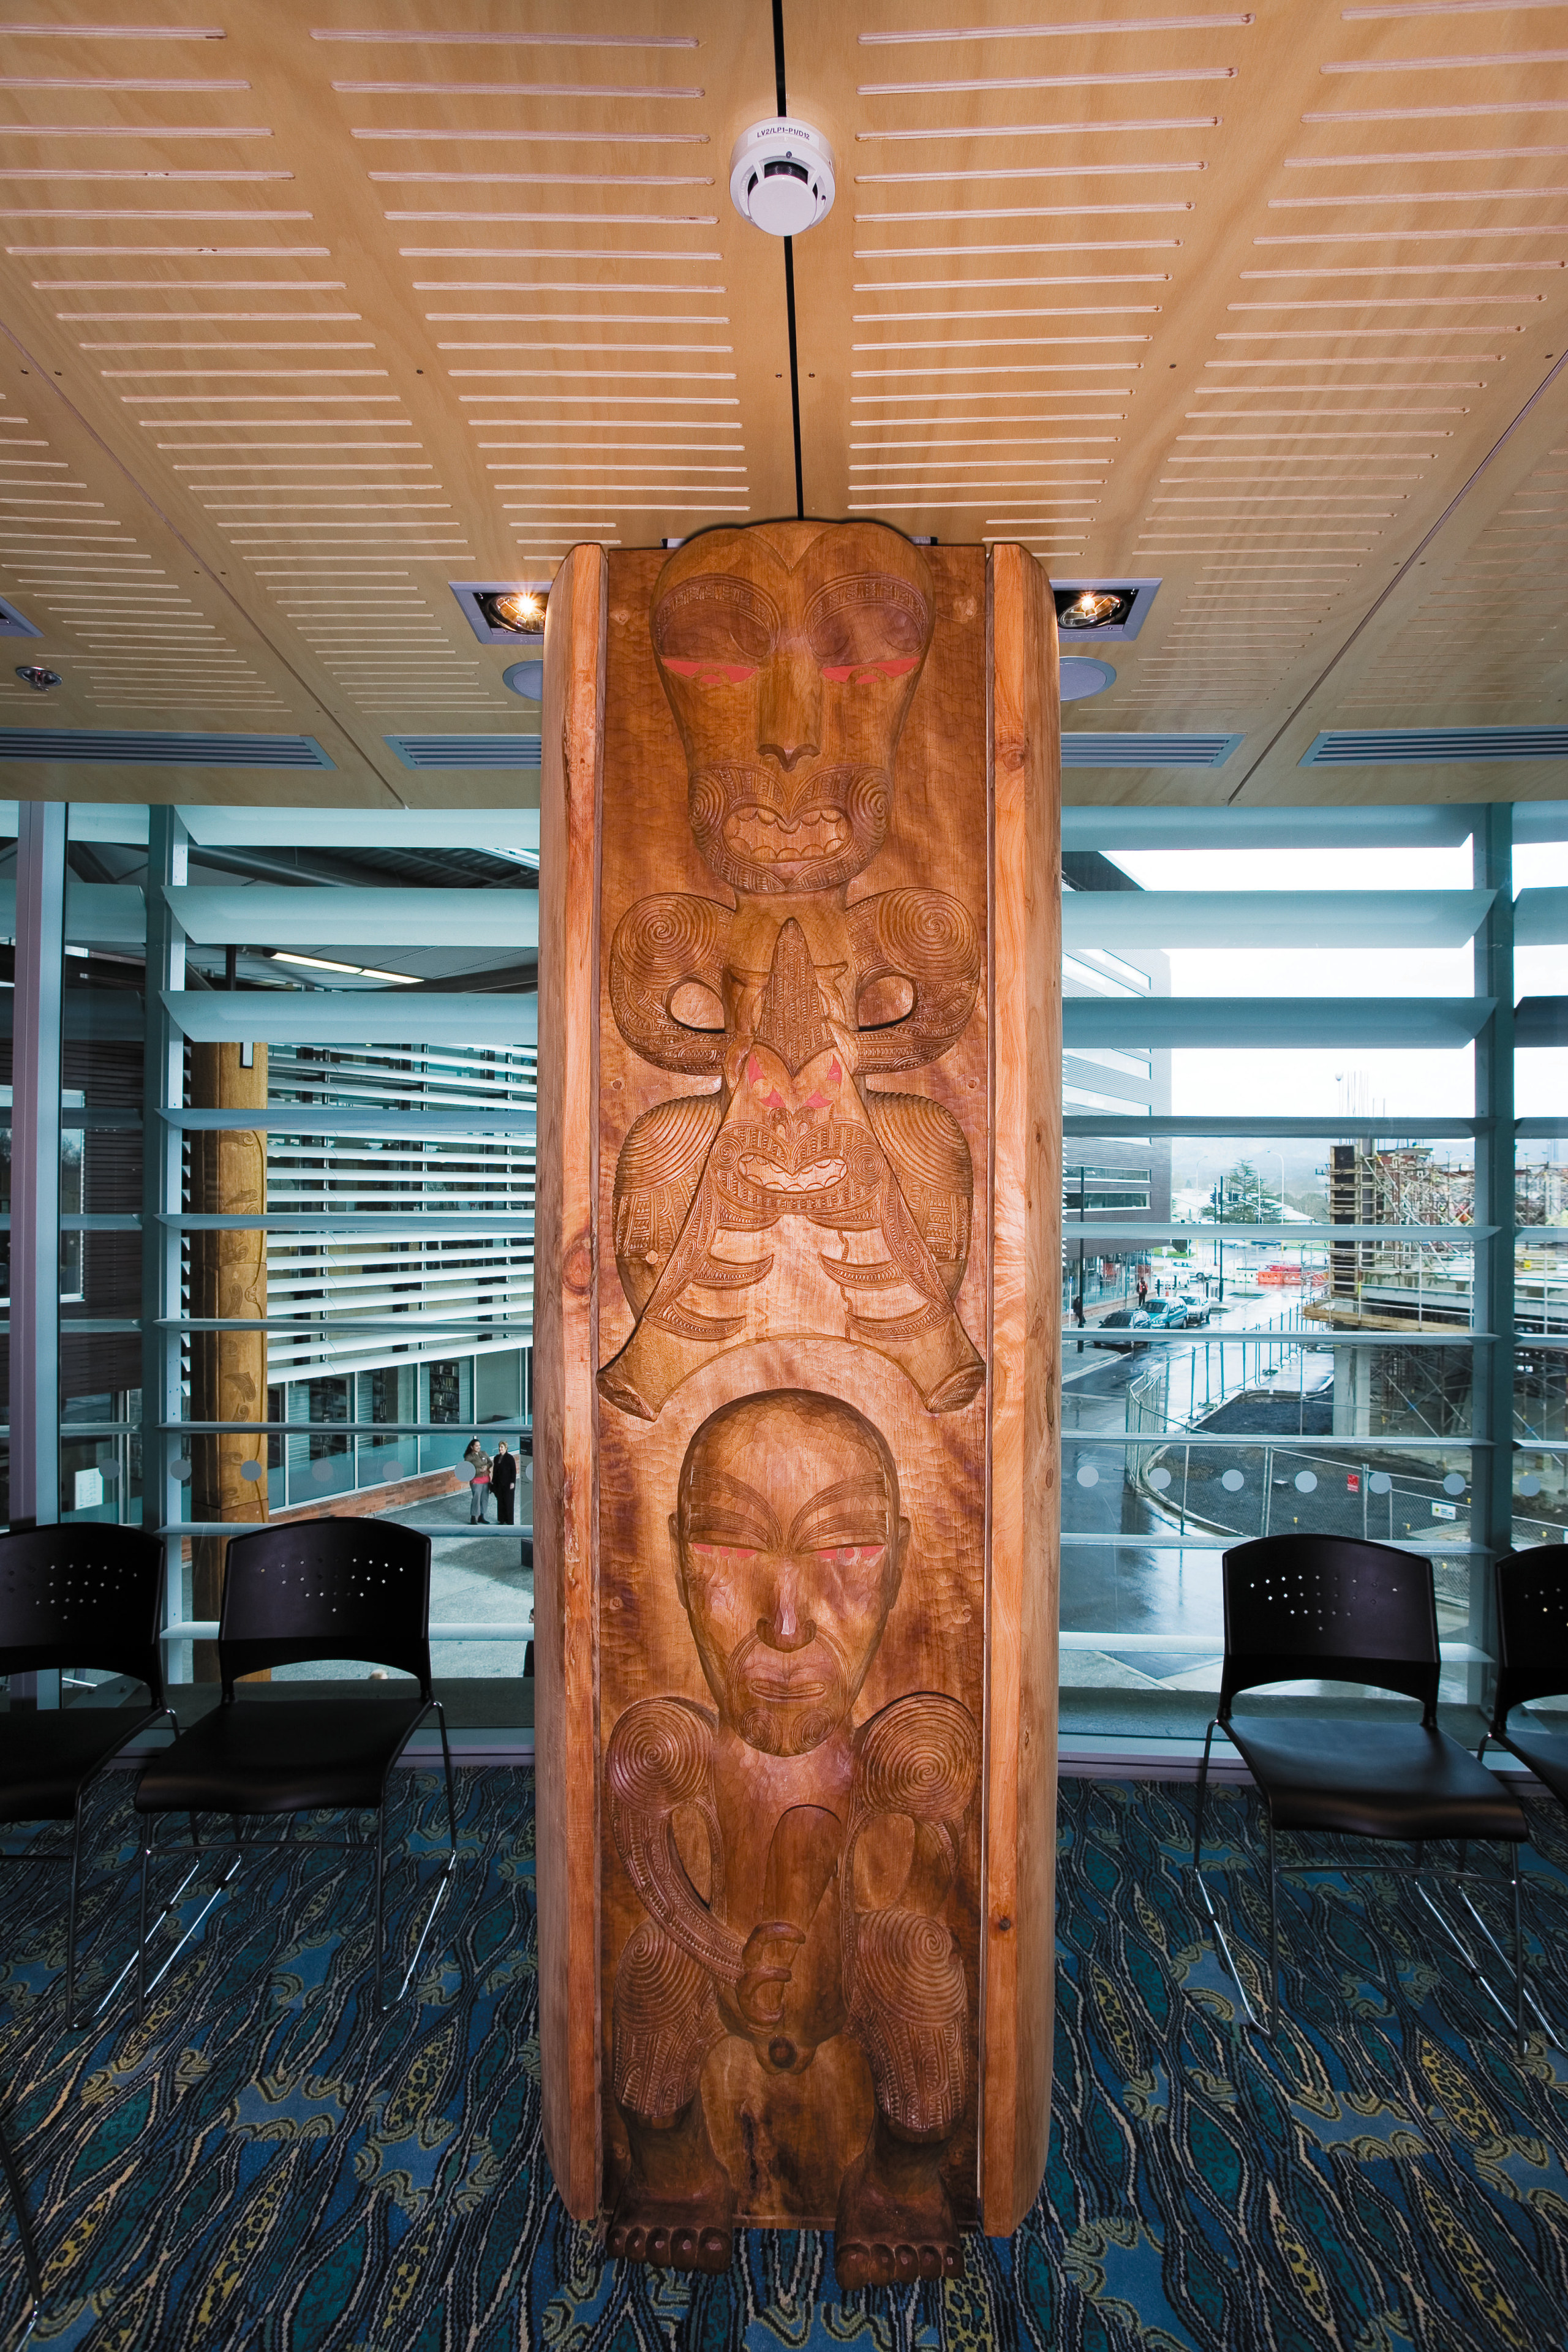 A view of a Maori carving. - A art, carving, wood